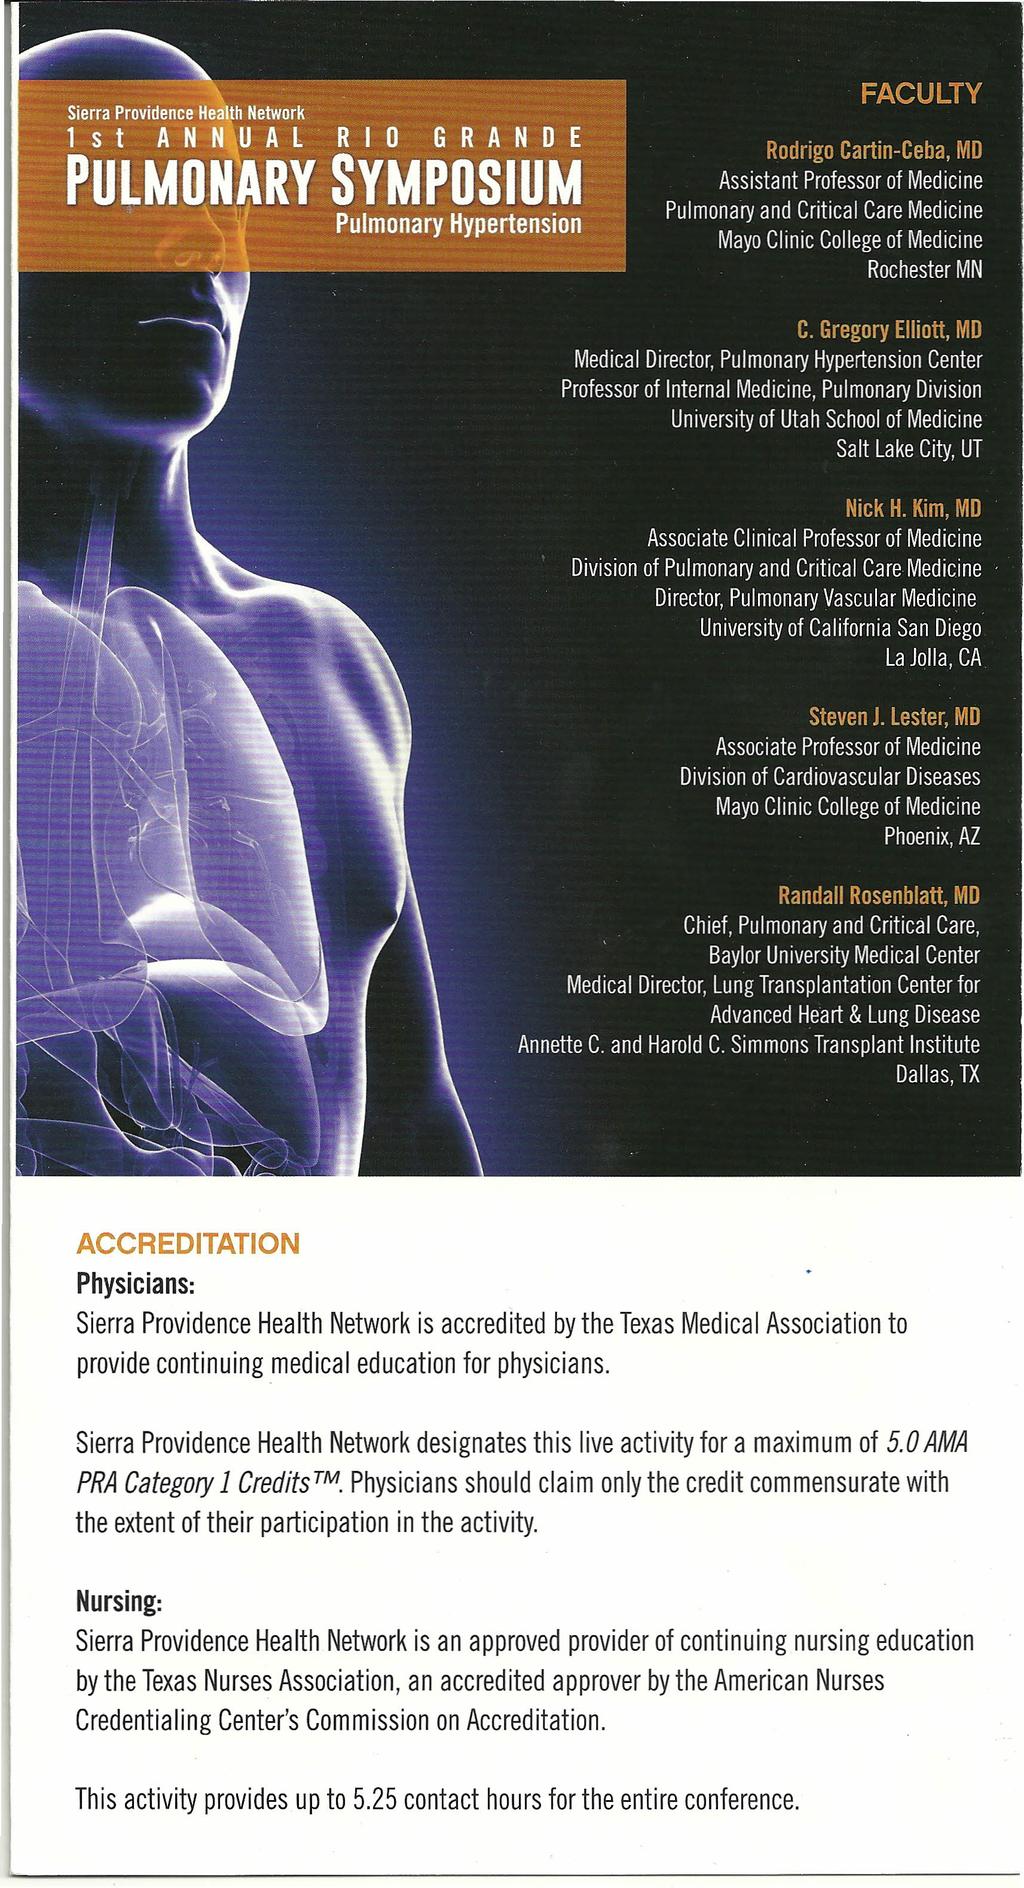 ACCREDITATION Physicians: Sierra Providence Health Network is accredited by the Texas Medical Association to provide continuing medical education for physicians.